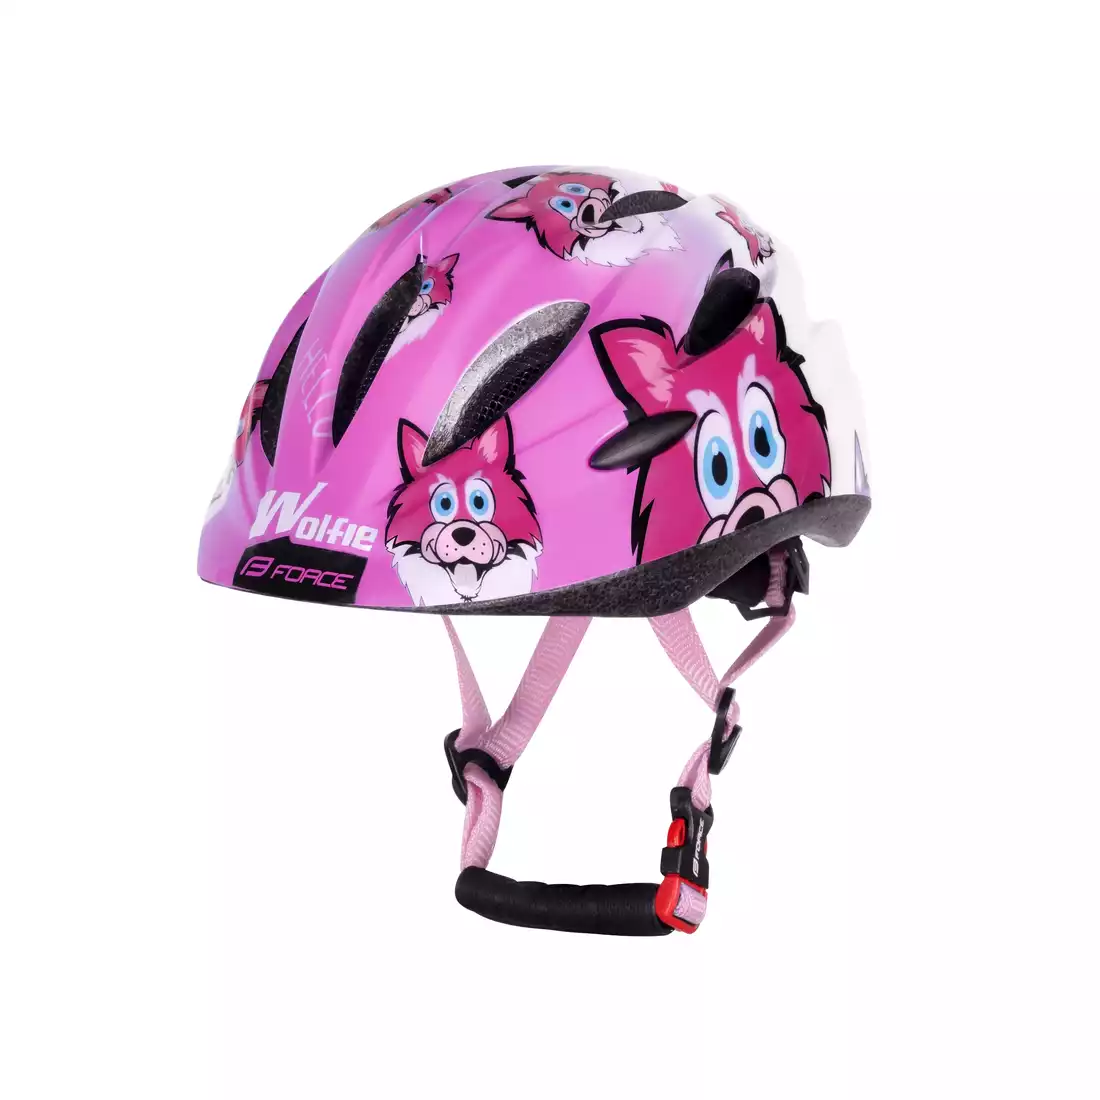 FORCE WOLFIE Bicycle helmet, children, pink and white